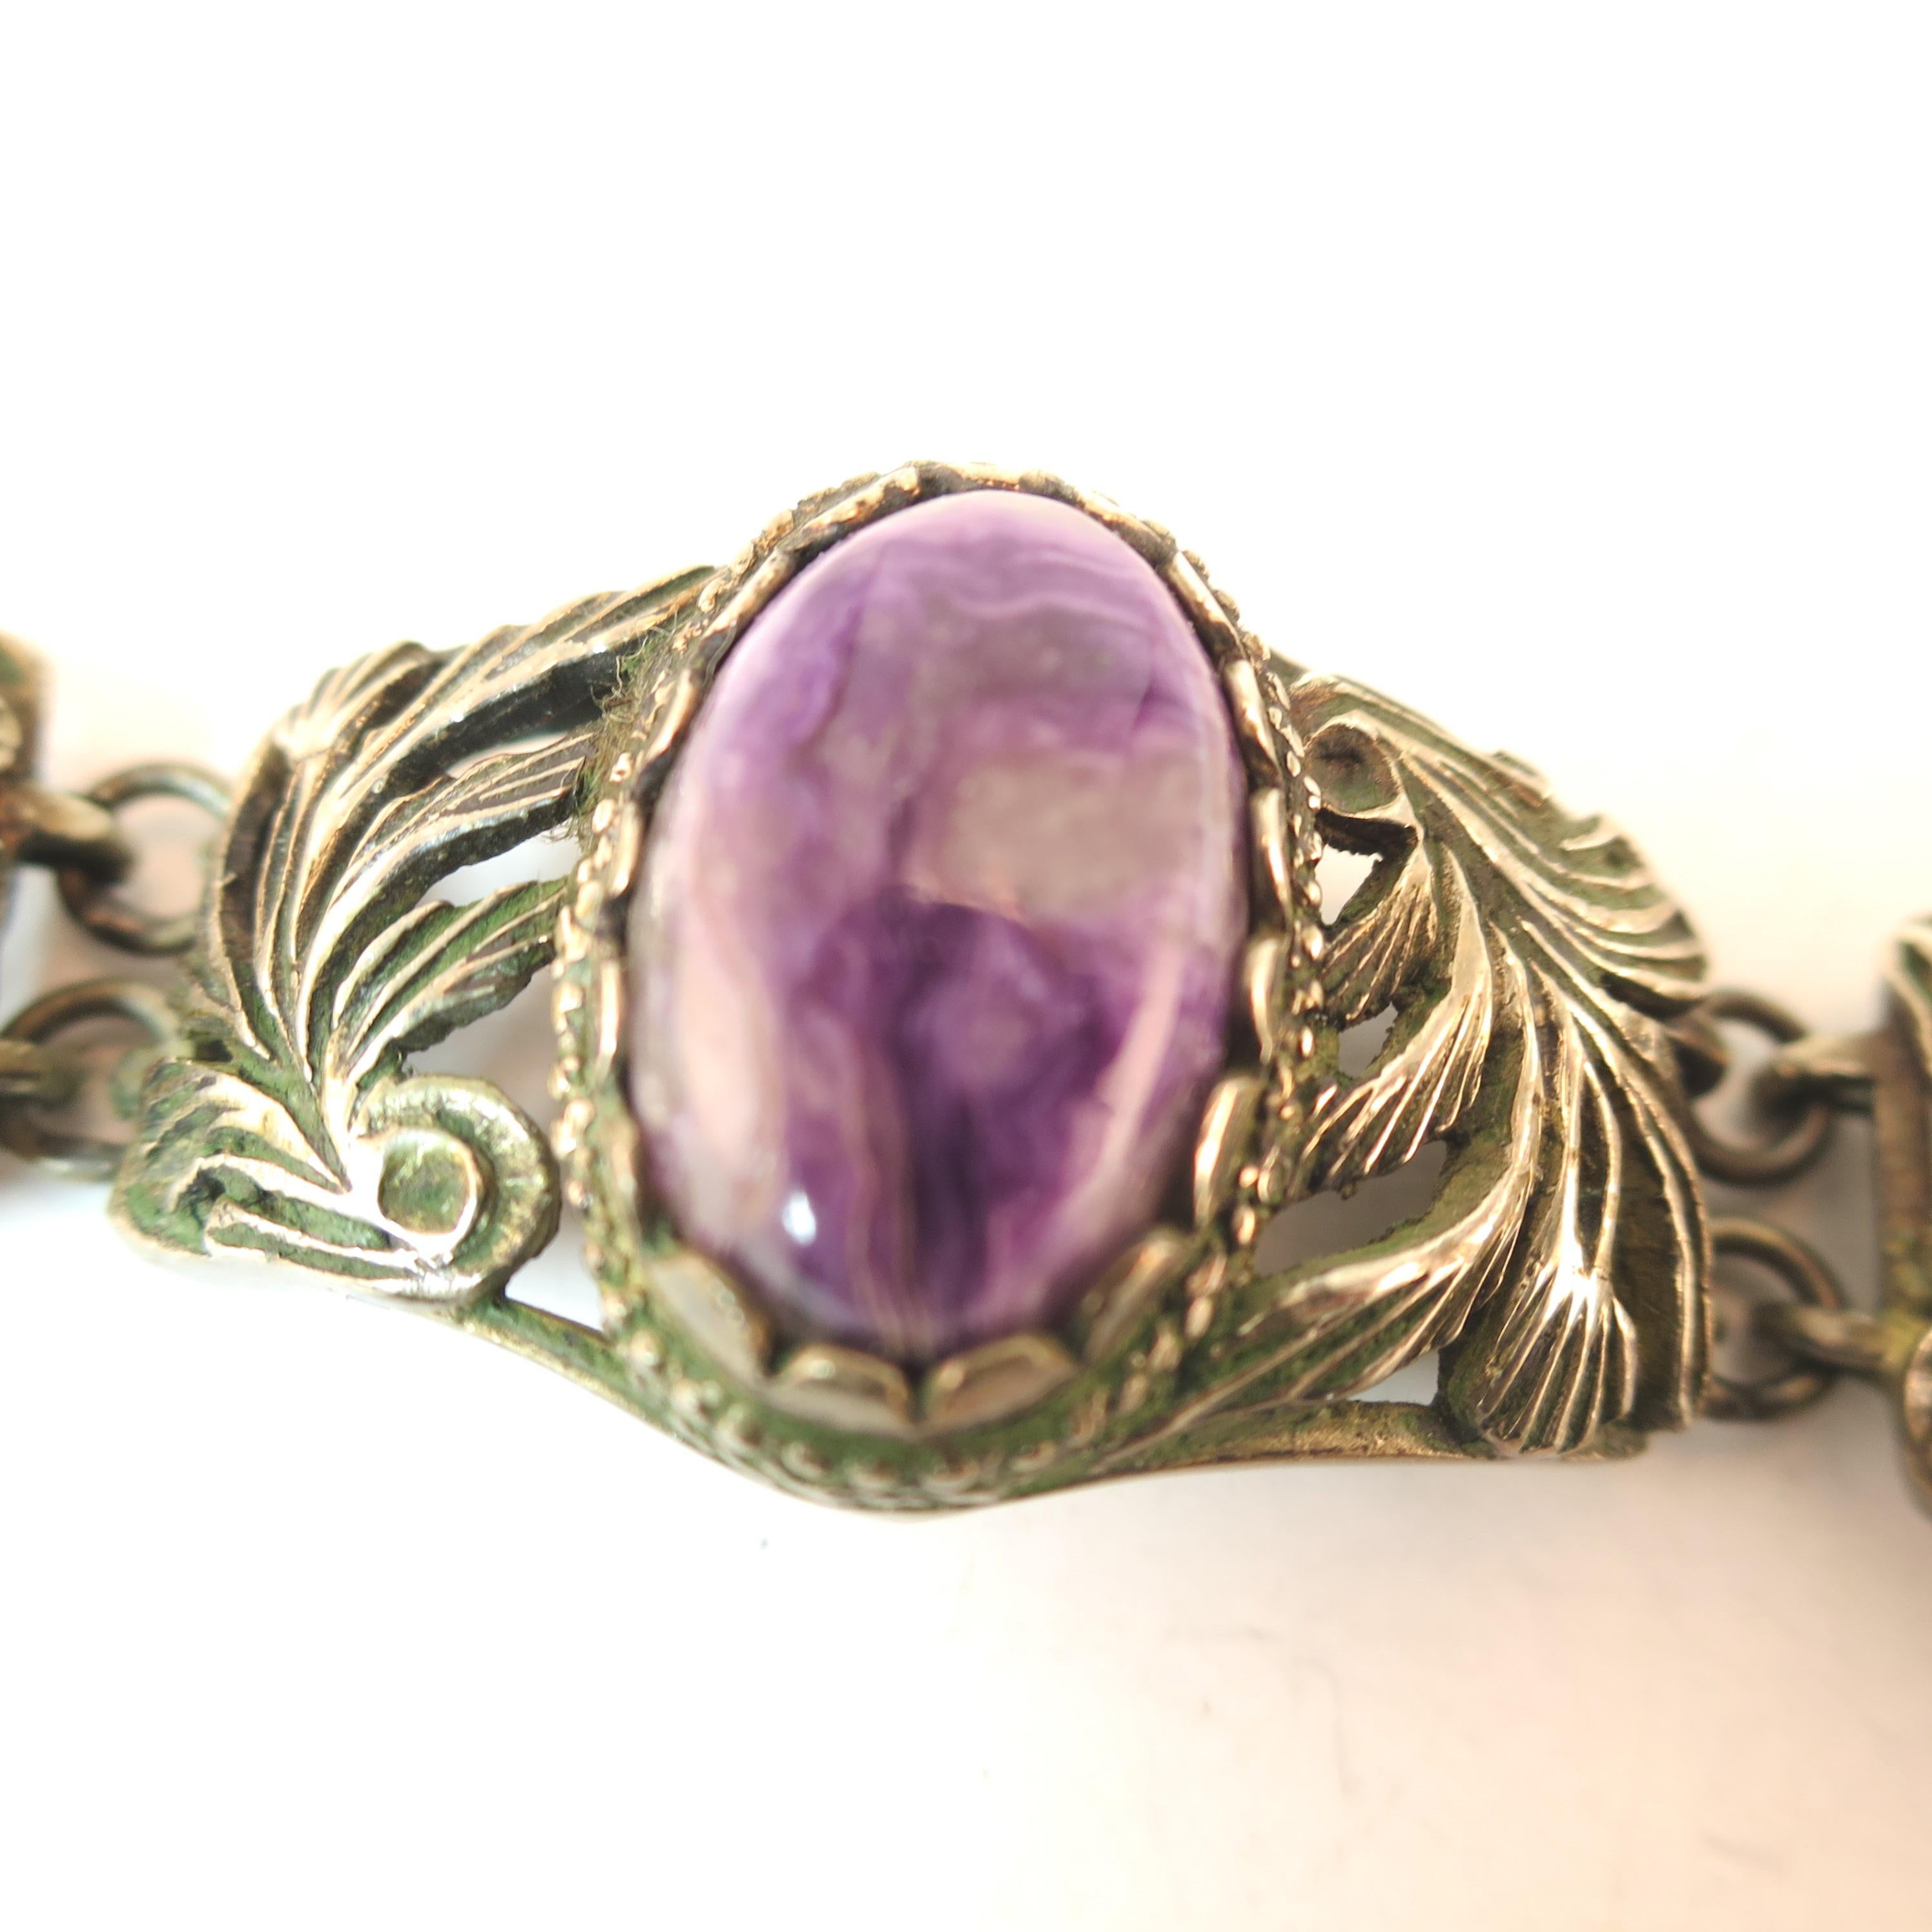 Victorian Chinese Export Silver & Amethyst Link Bracelet, Circa 1860s For Sale 1